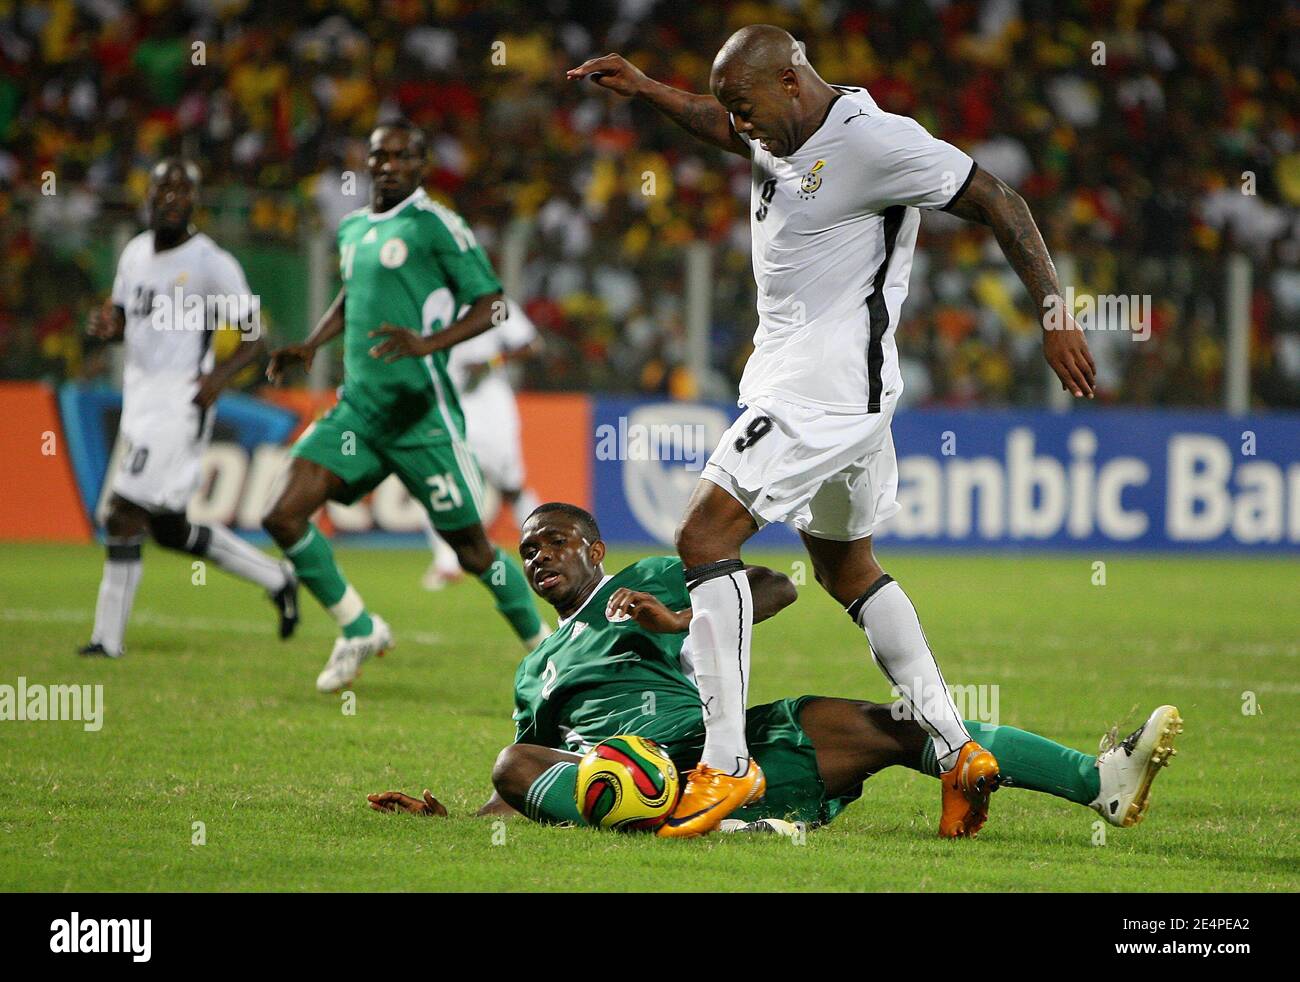 Ghana's Agogo Manuel and Nigeria's Joseph Yobo battle for the ball during the African Cup of Nations, quarter finals, soccer match, Ghana vs Nigeria in Accra, Ghana on February 3, 2008. The Ghana won 2-1. Photo by Steeve McMay/Cameleon/ABACAPRESS.COM Stock Photo